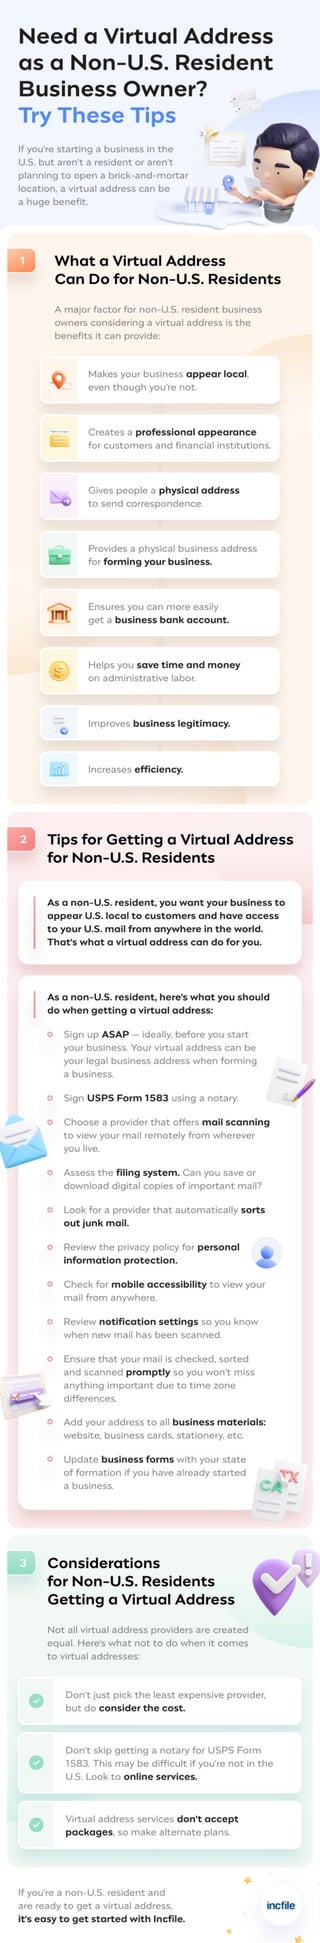 Do's and Don'ts of Getting a Virtual Address for a Non-U.S. Resident Business